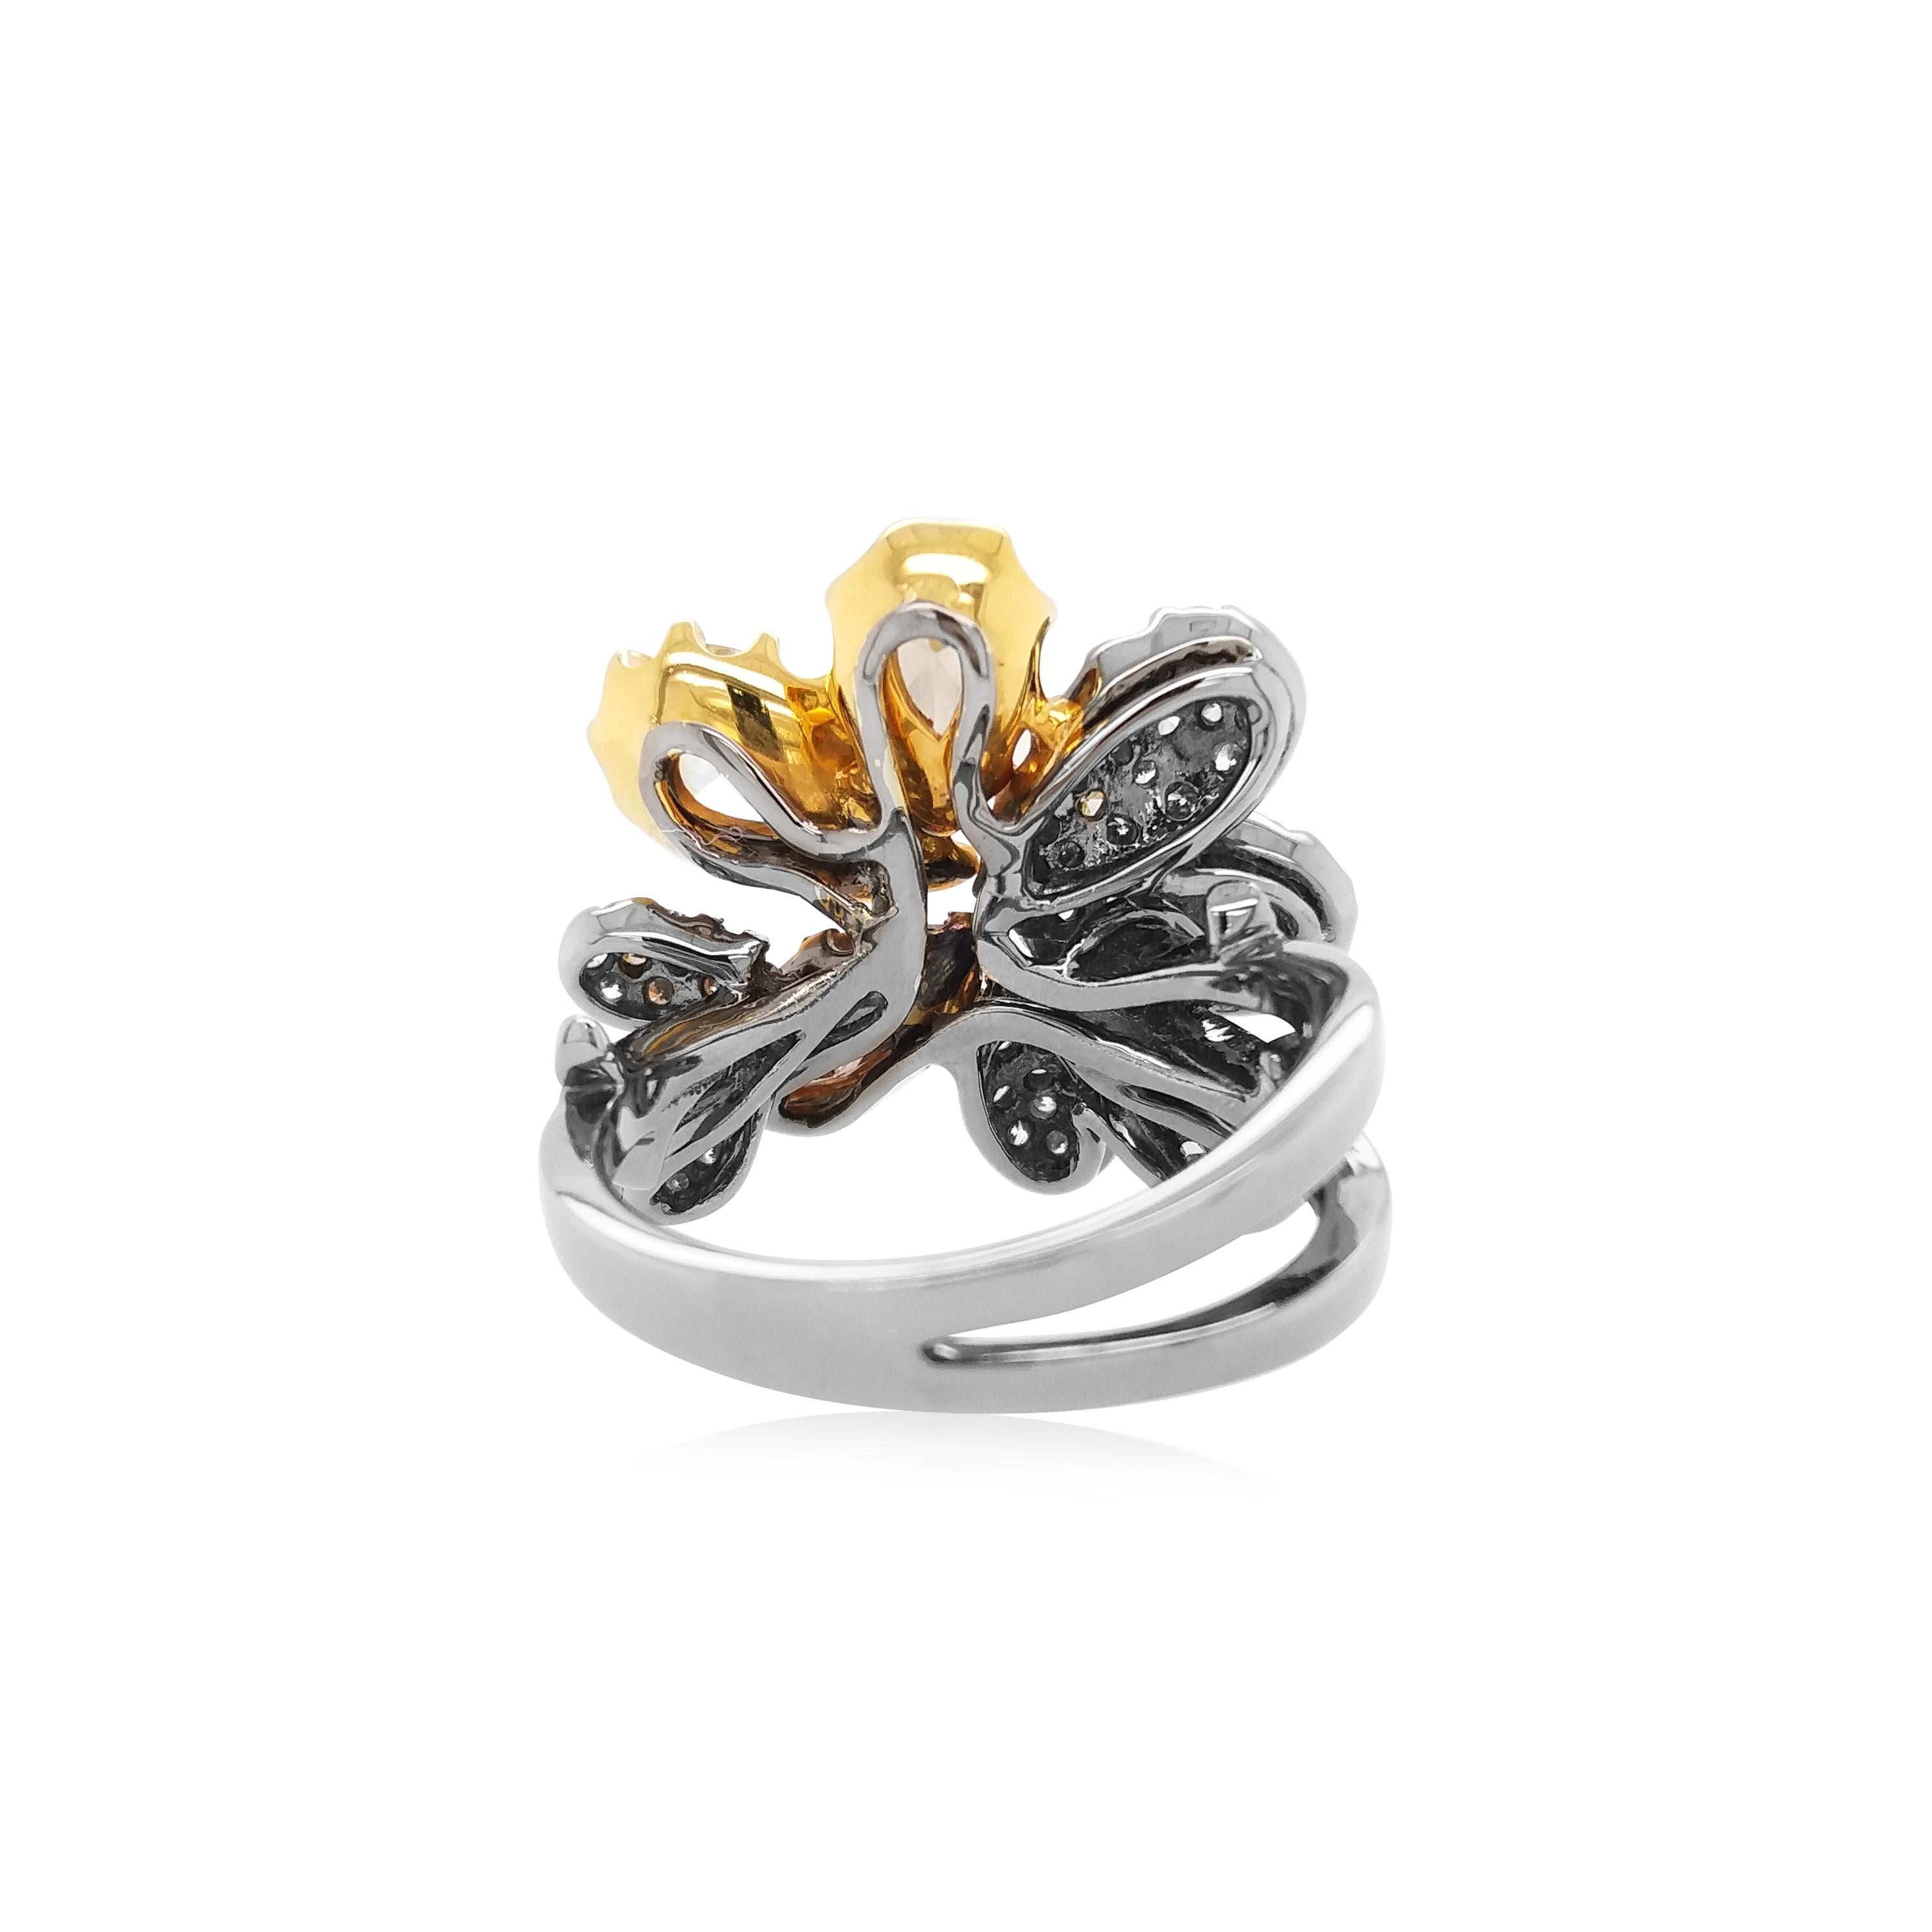 This Ring features three rare Fancy Color diamonds, Fancy Greenish Yellow, Brownish Yellow, and Brown diamond. The Color diamonds are paired with a set of petals made in round brilliant cut White diamonds giving it a bold 3-dimensional look. This